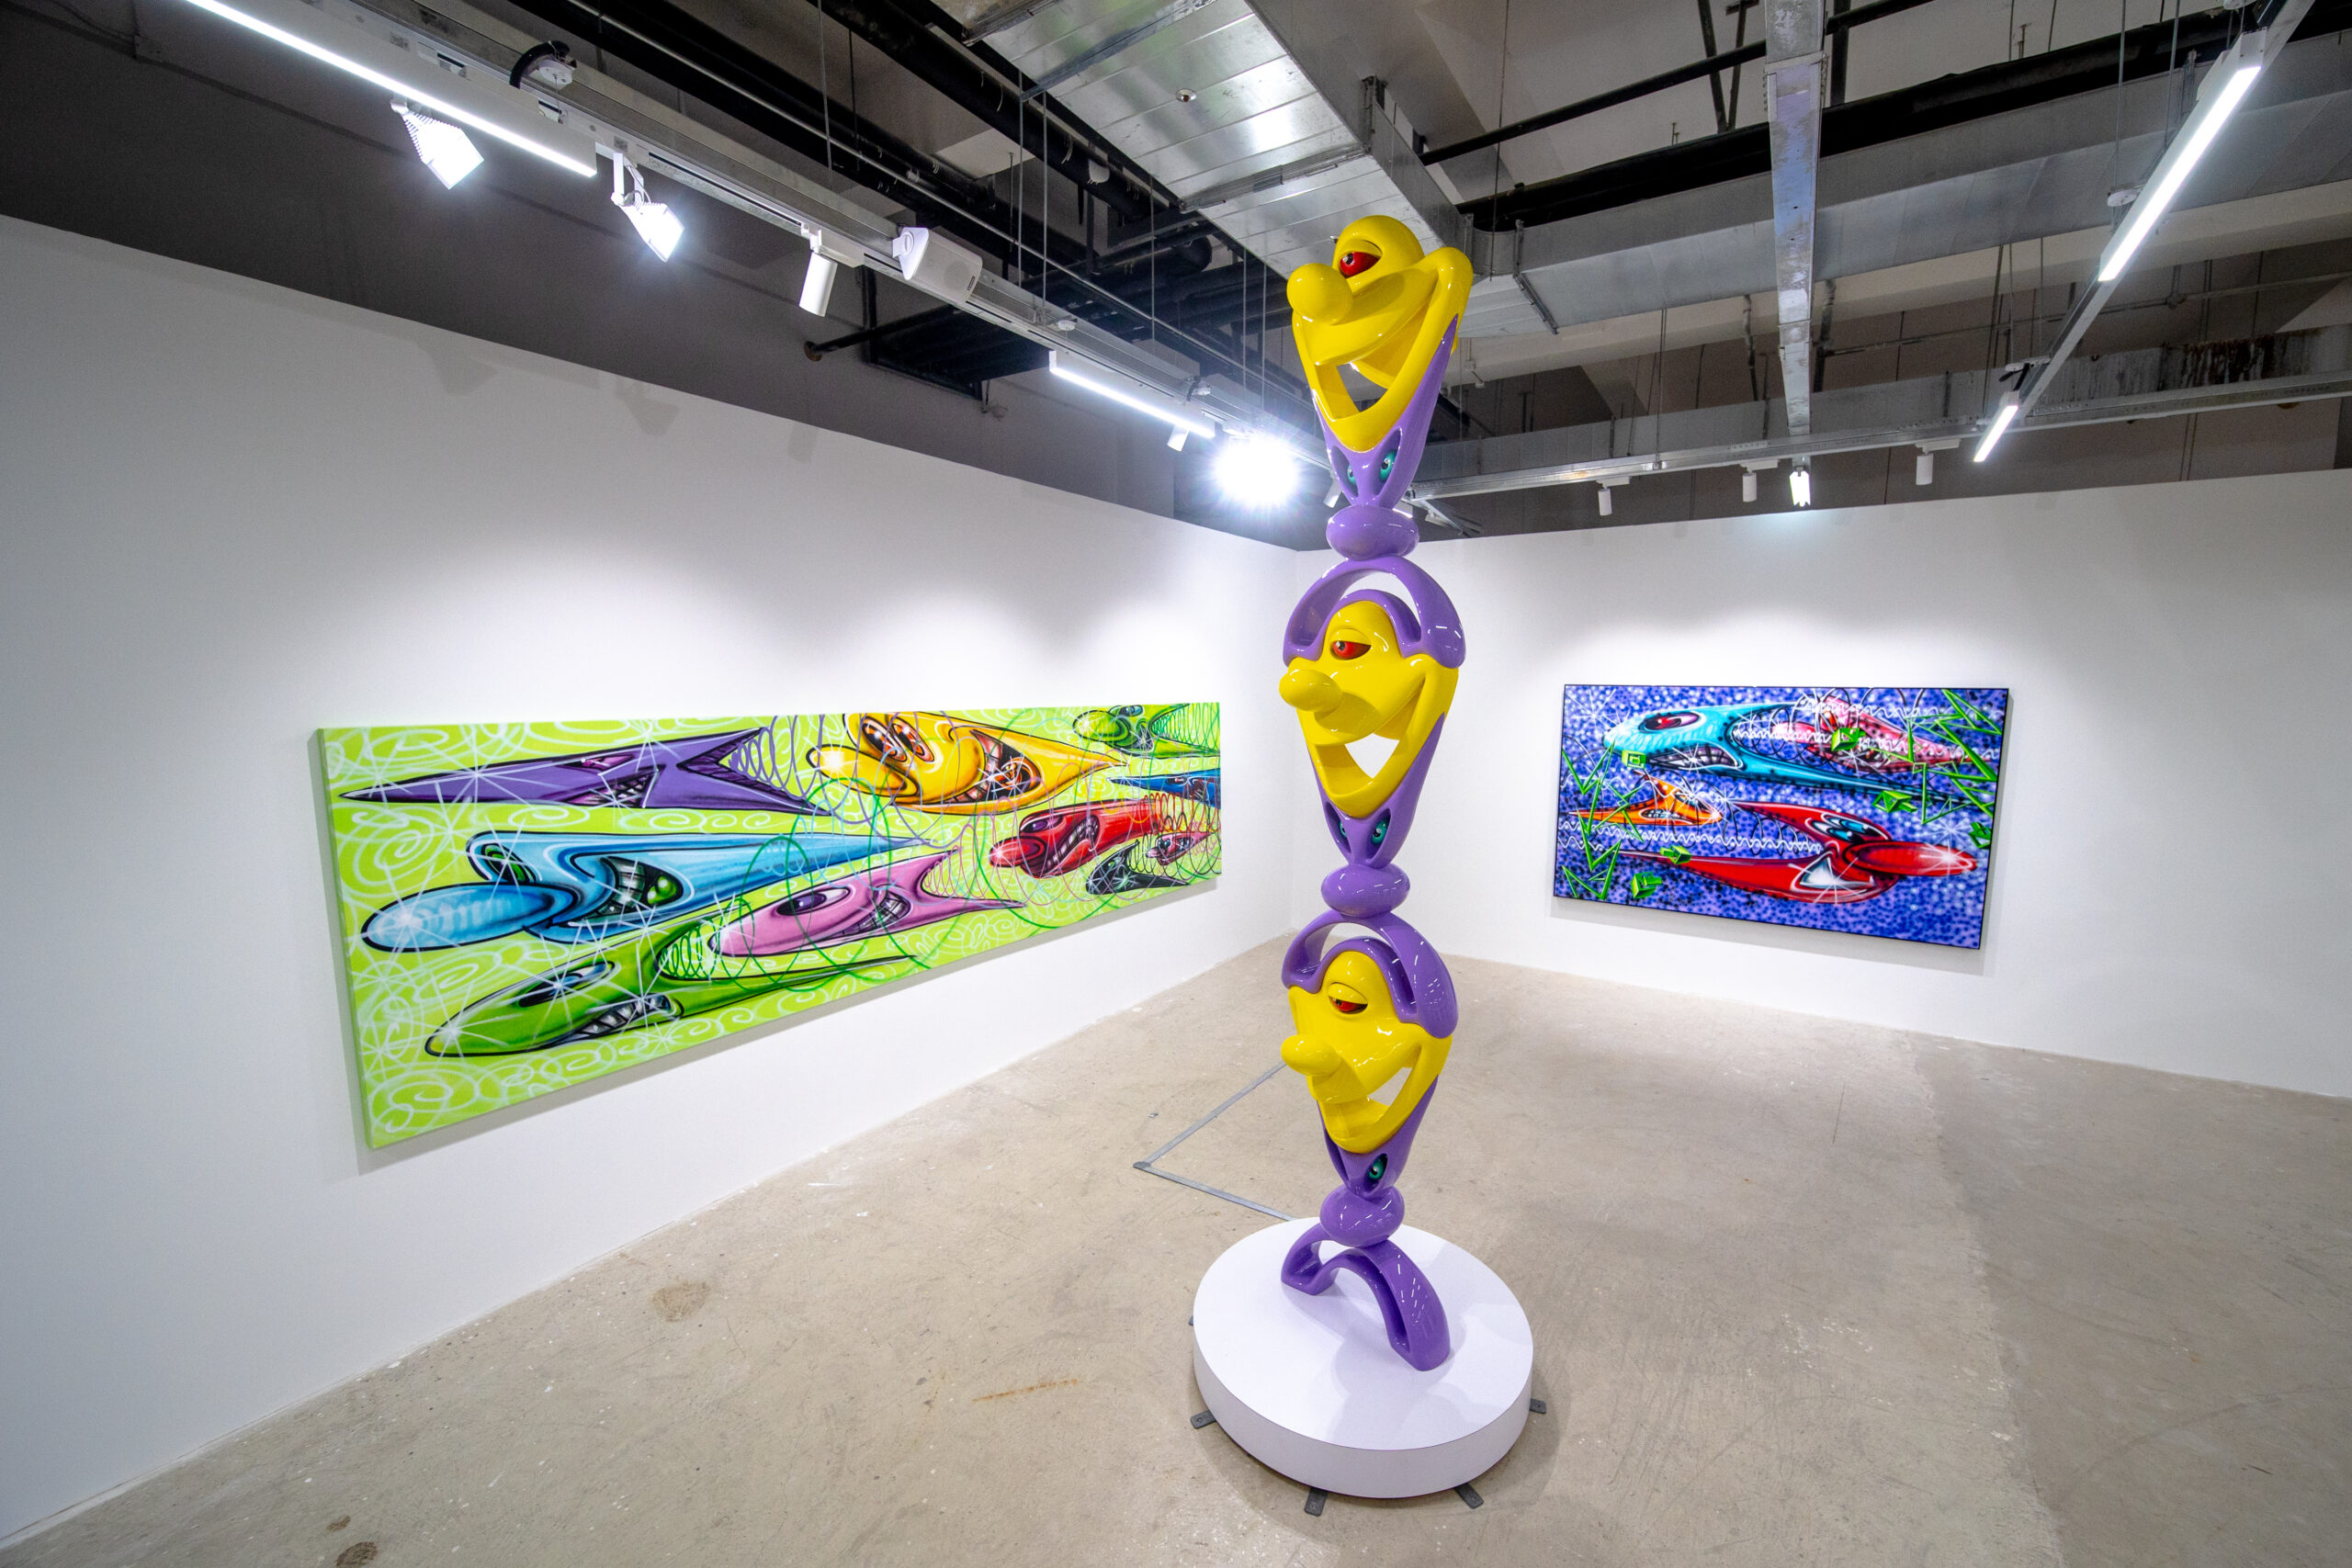 American artist Kenny Scharf's works are on display at the 2023 